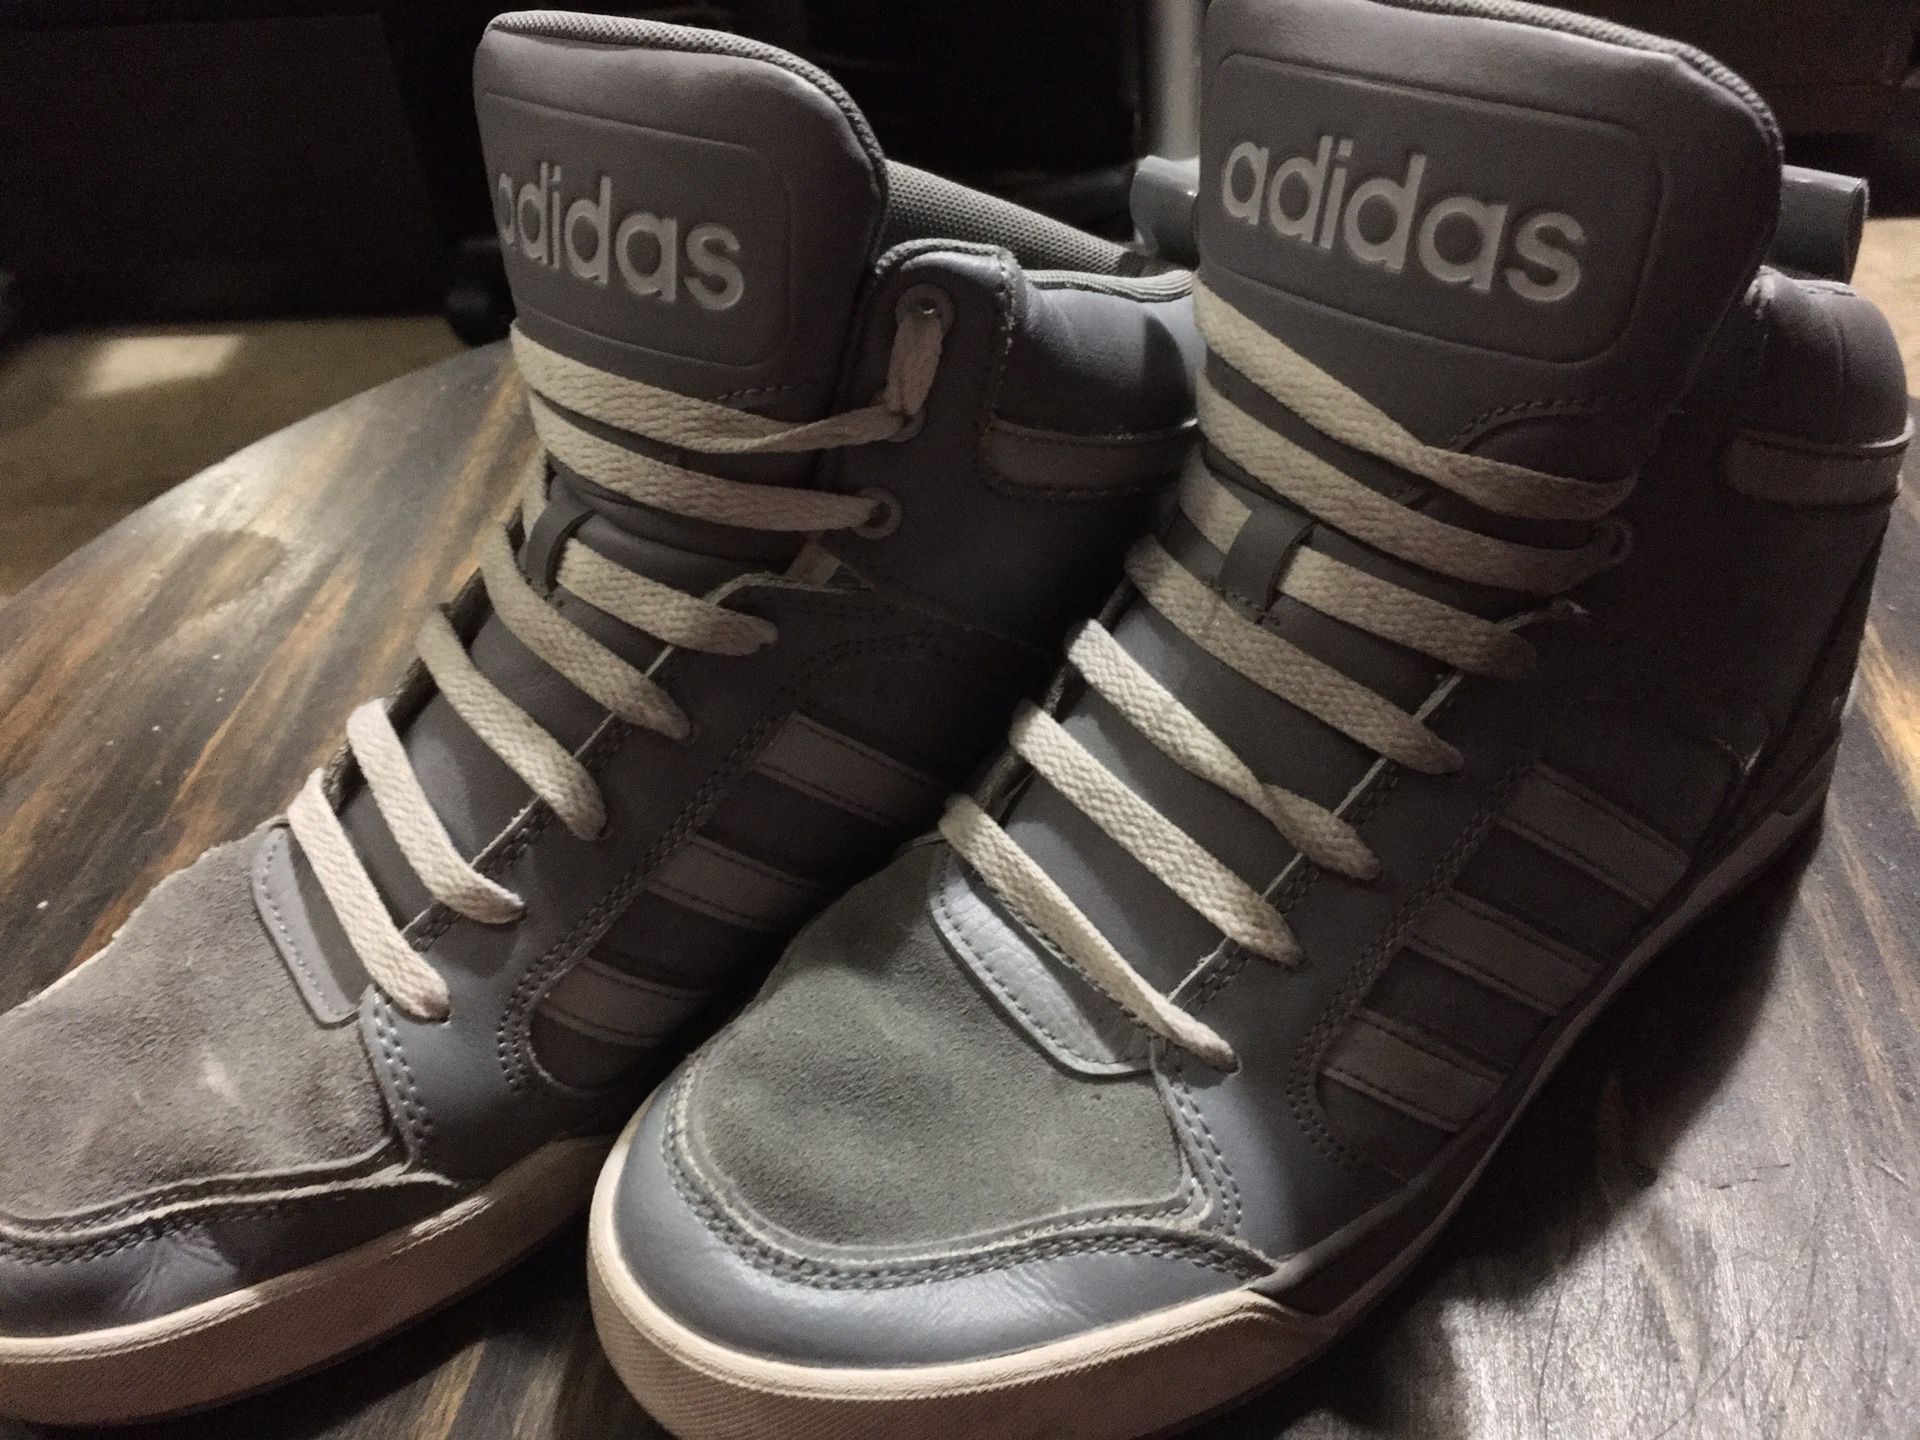 Adidas (Men's) Raleigh 9Tis Mid High-Top Shoes Size 10, Gray